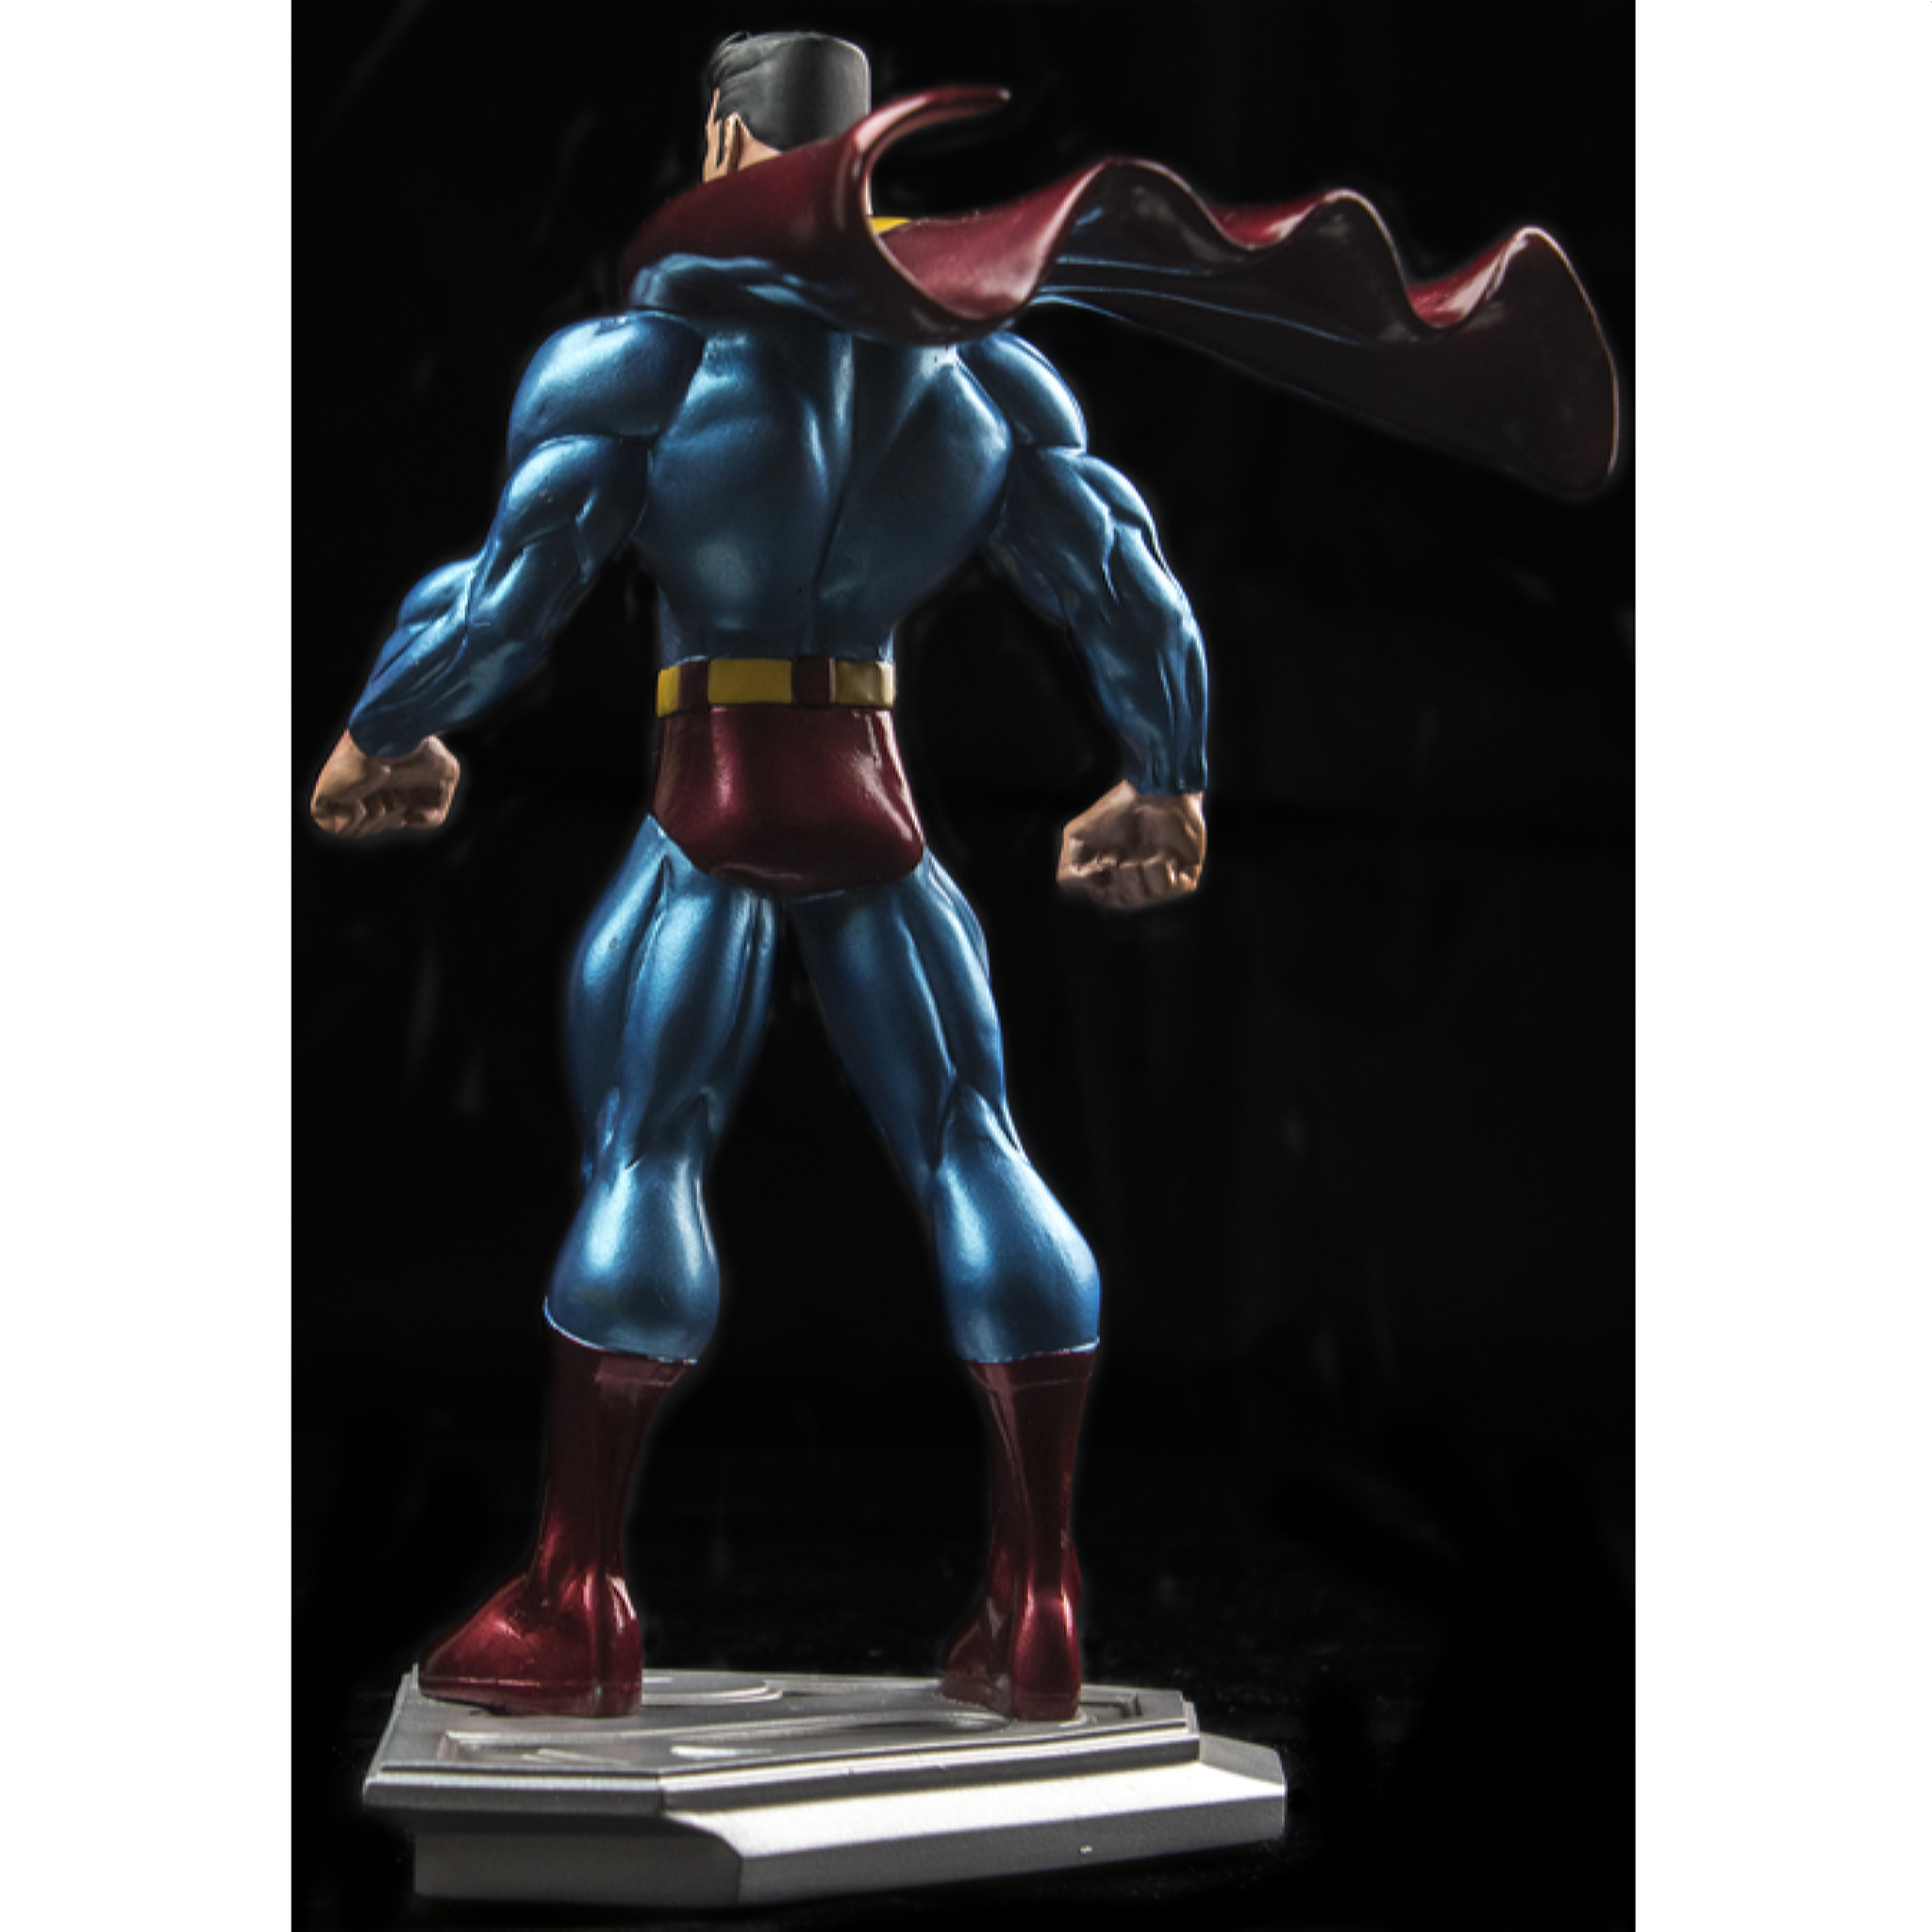 DC Collectibles Superman Man of Steel by Ed McGuinness Statue EX DISPLAY